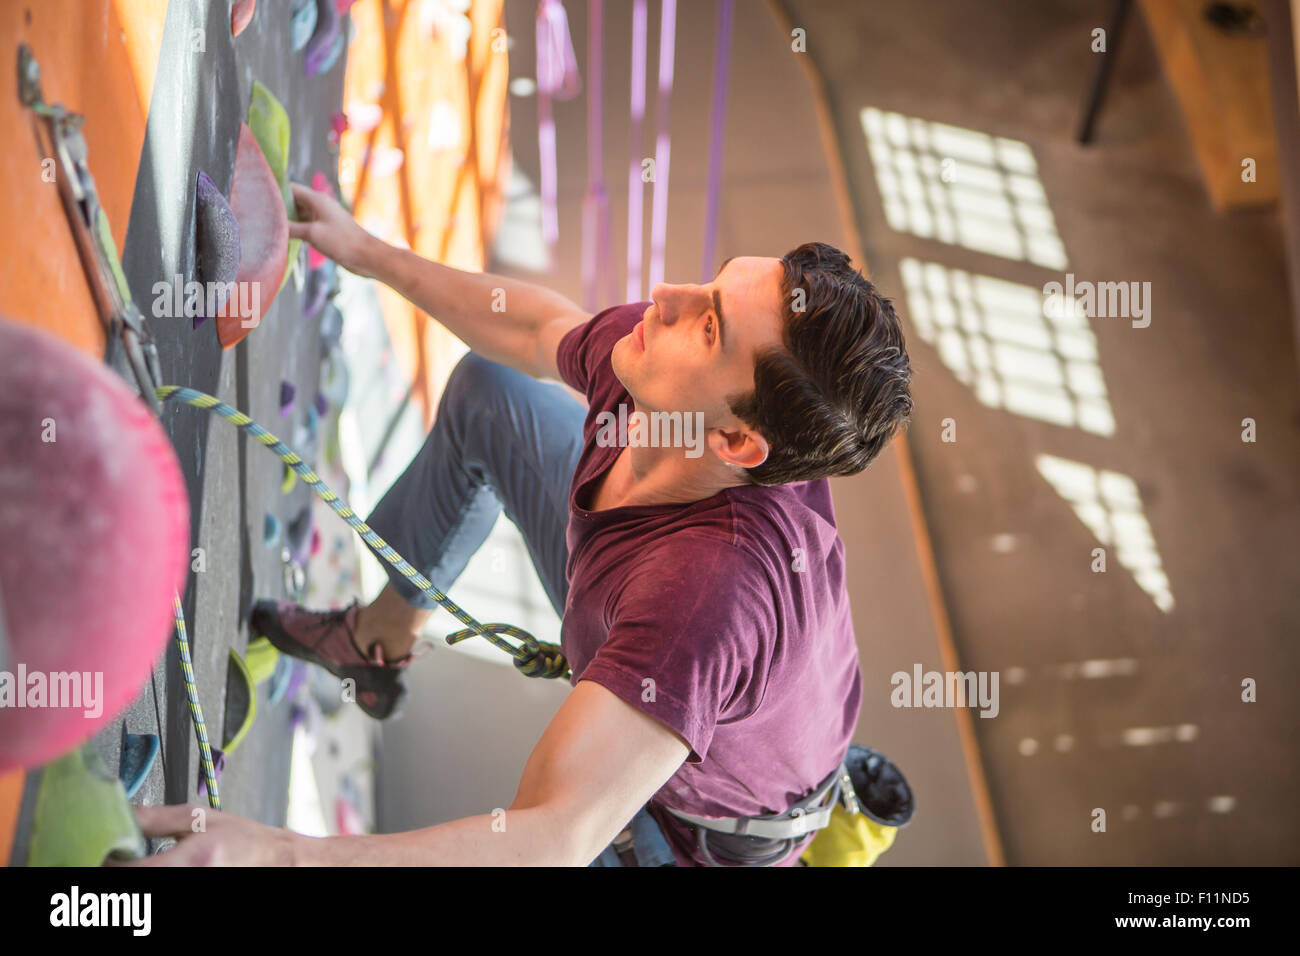 High angle view of athlete climbing rock wall in gym Stock Photo